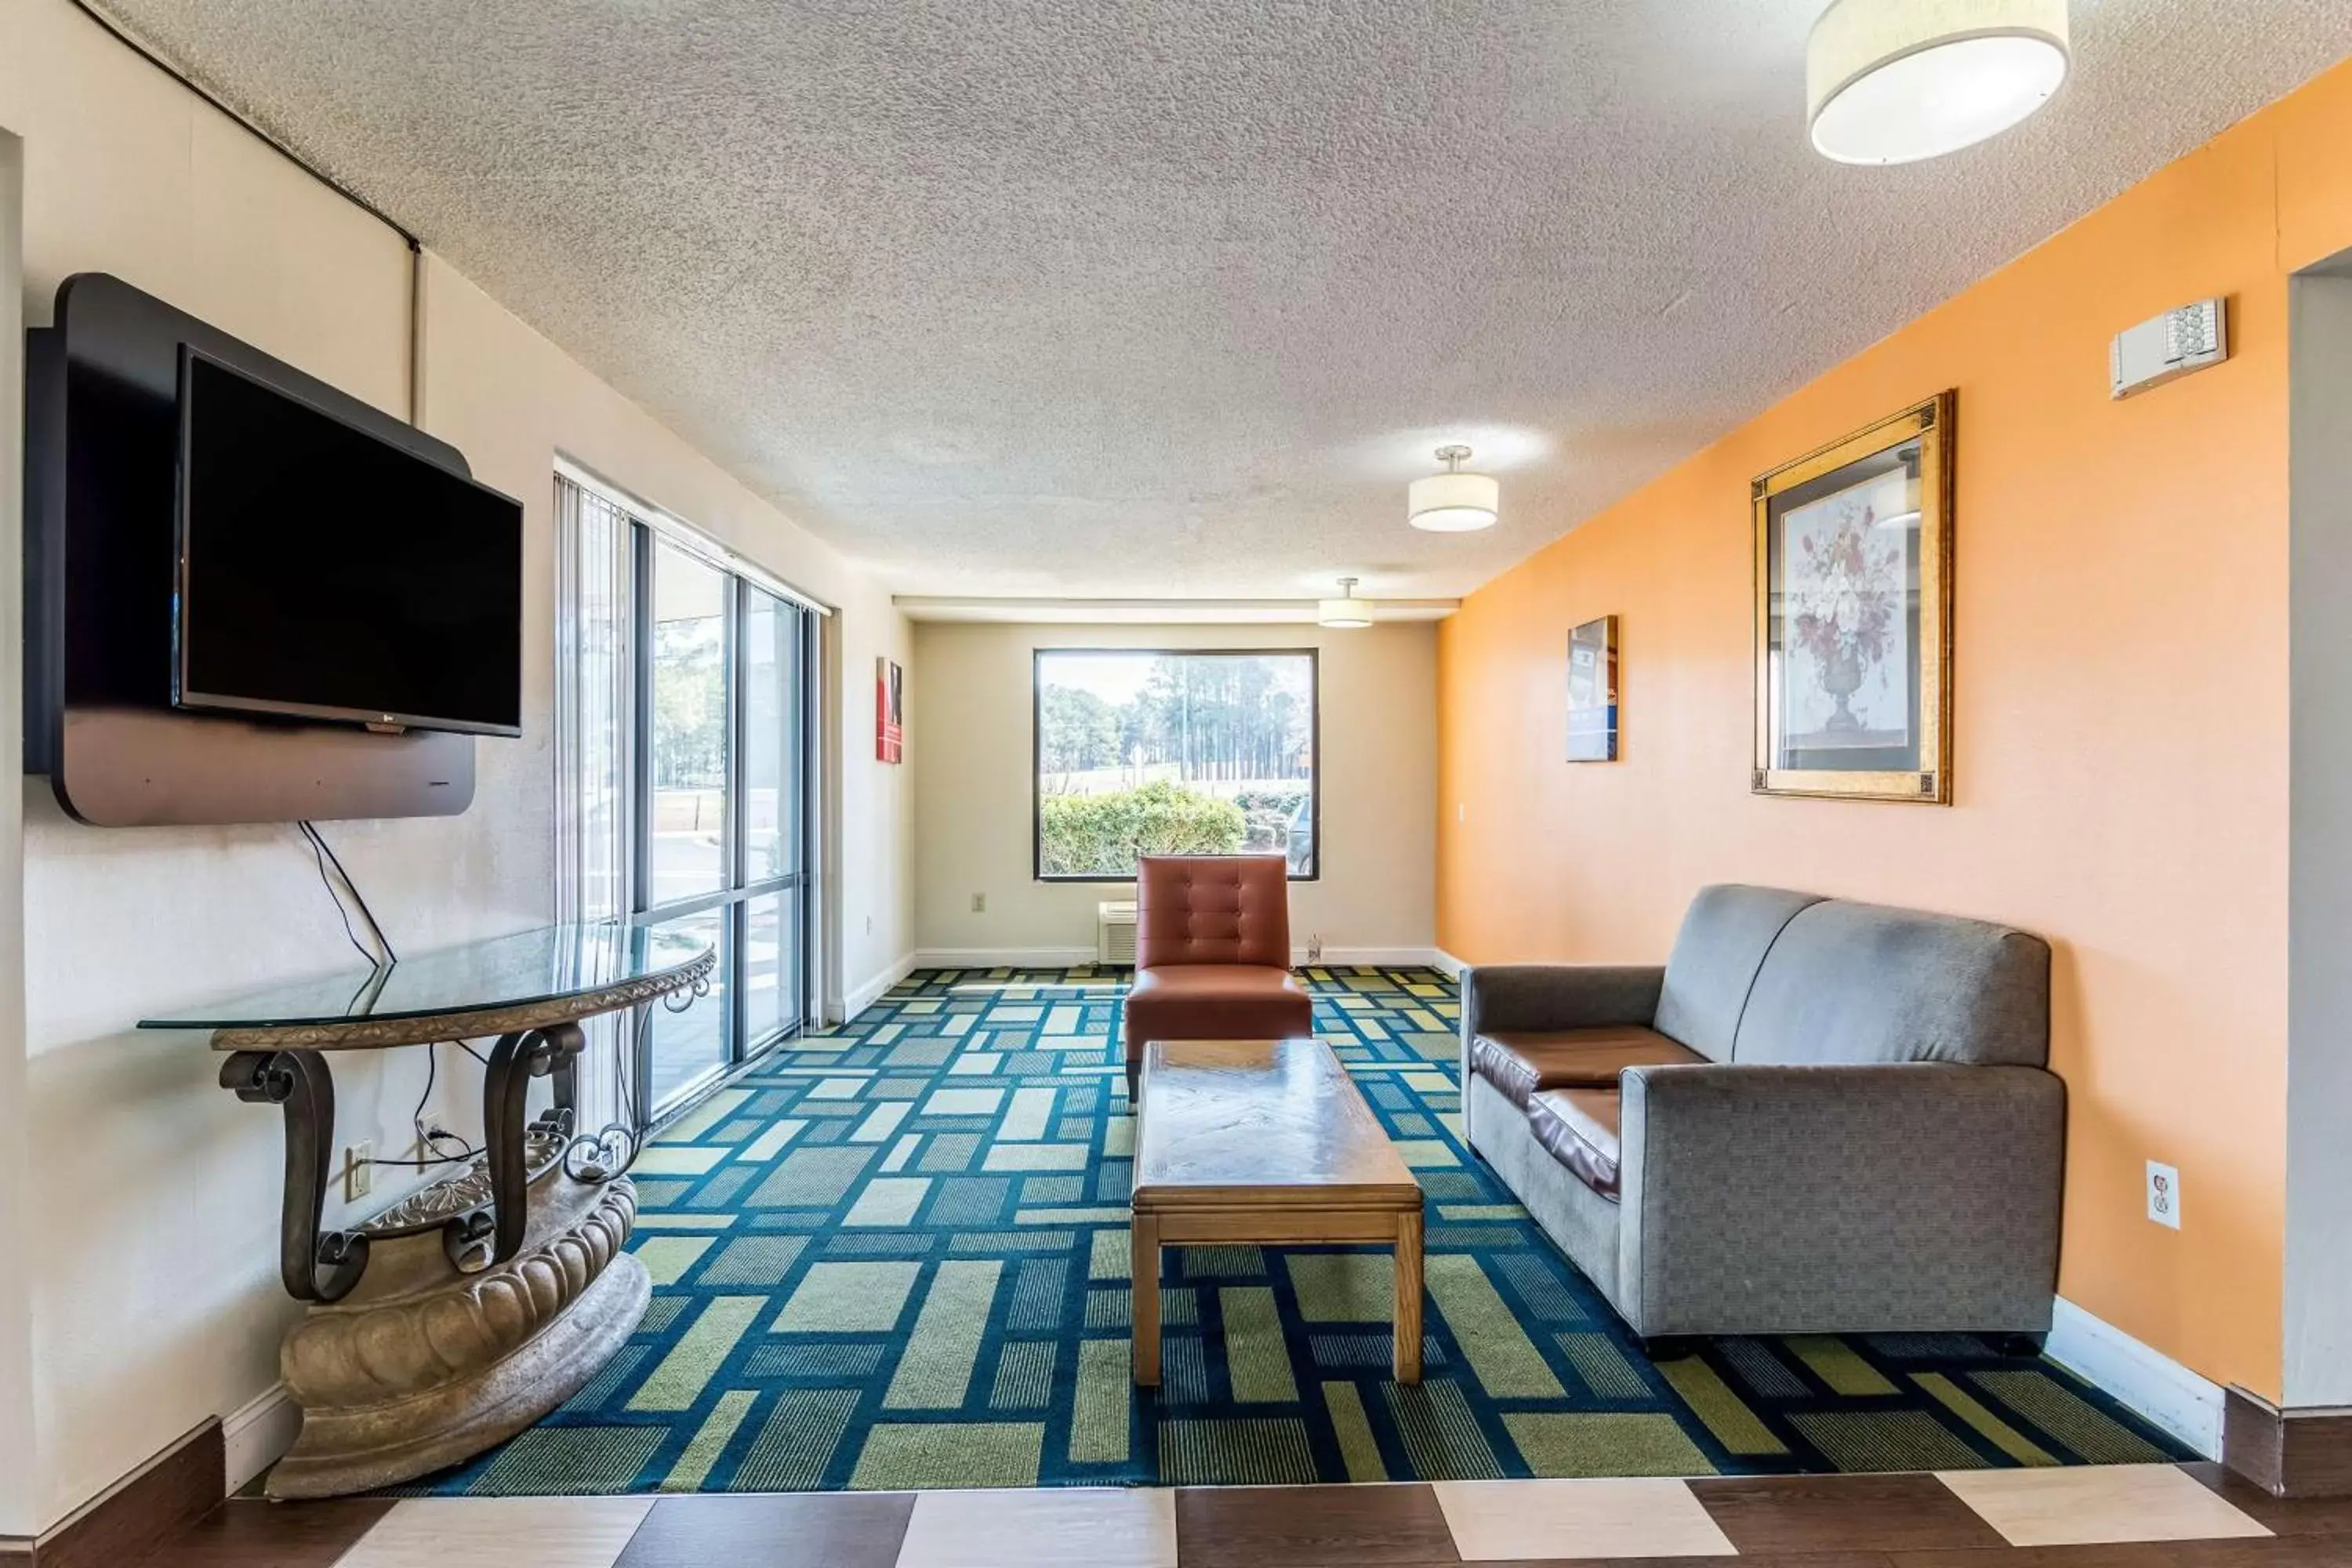 Lobby or reception in Motel 6-Kenly, NC